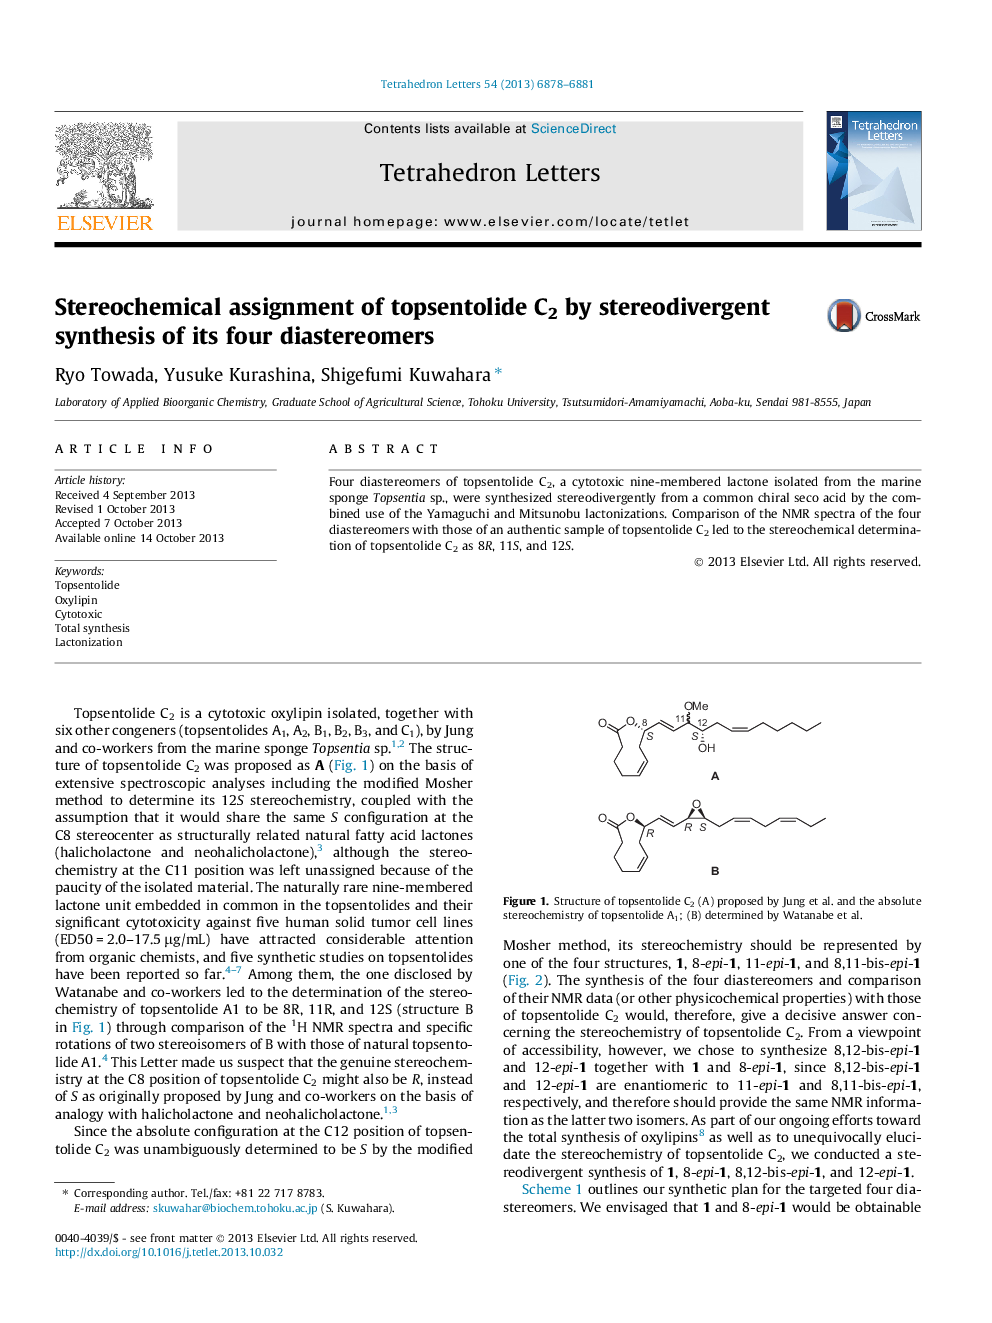 Stereochemical assignment of topsentolide C2 by stereodivergent synthesis of its four diastereomers